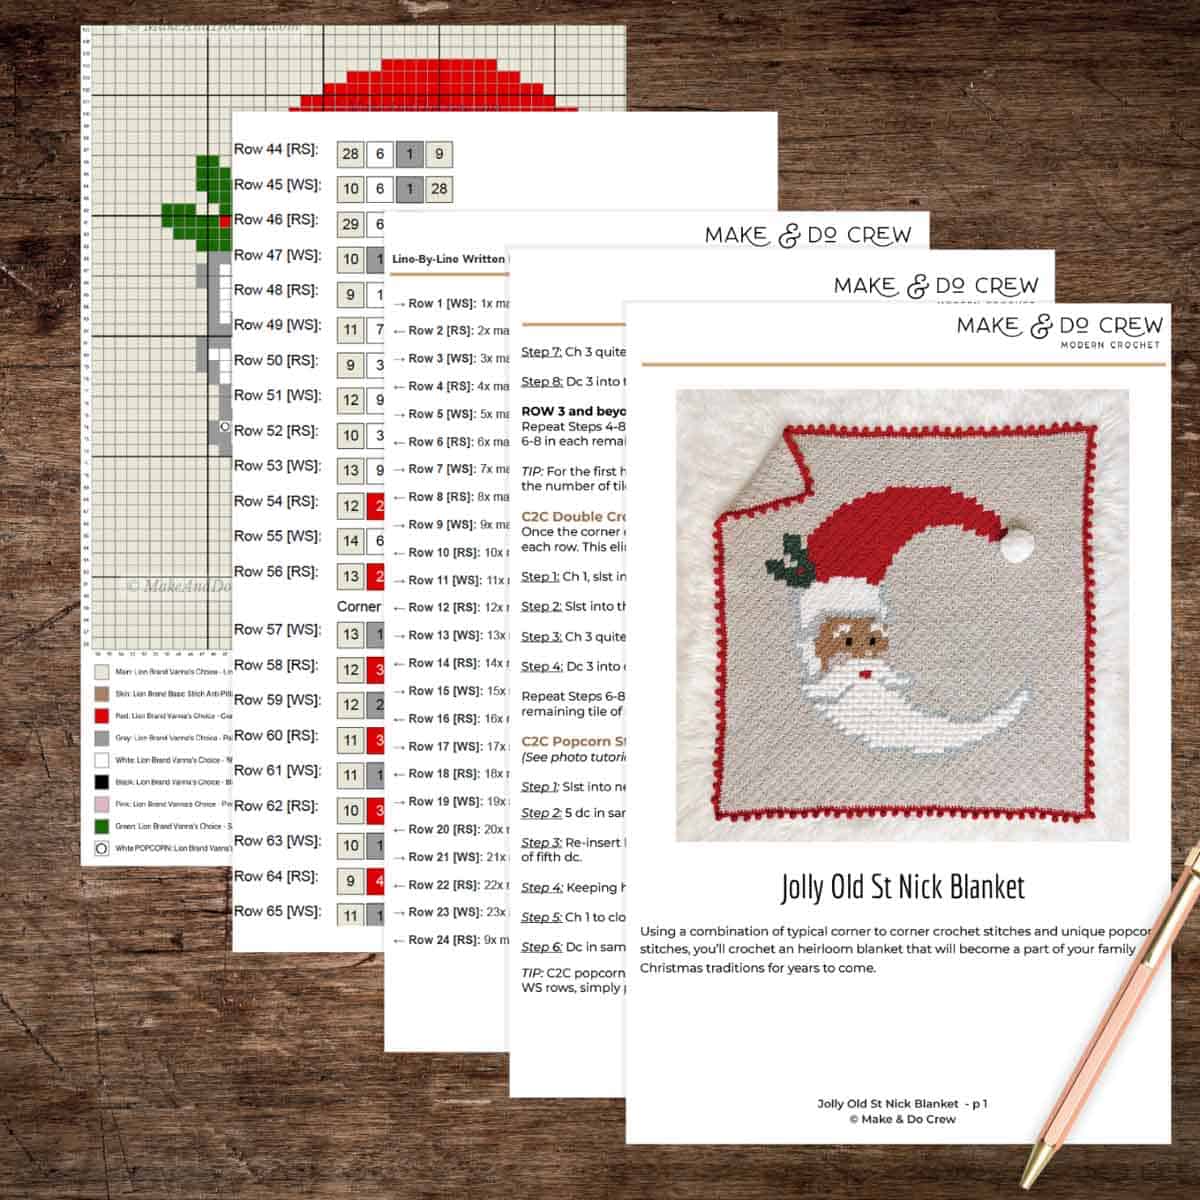 This image shows a printable PDF preview of a crochet pattern for a corner to corner Santa blanket.